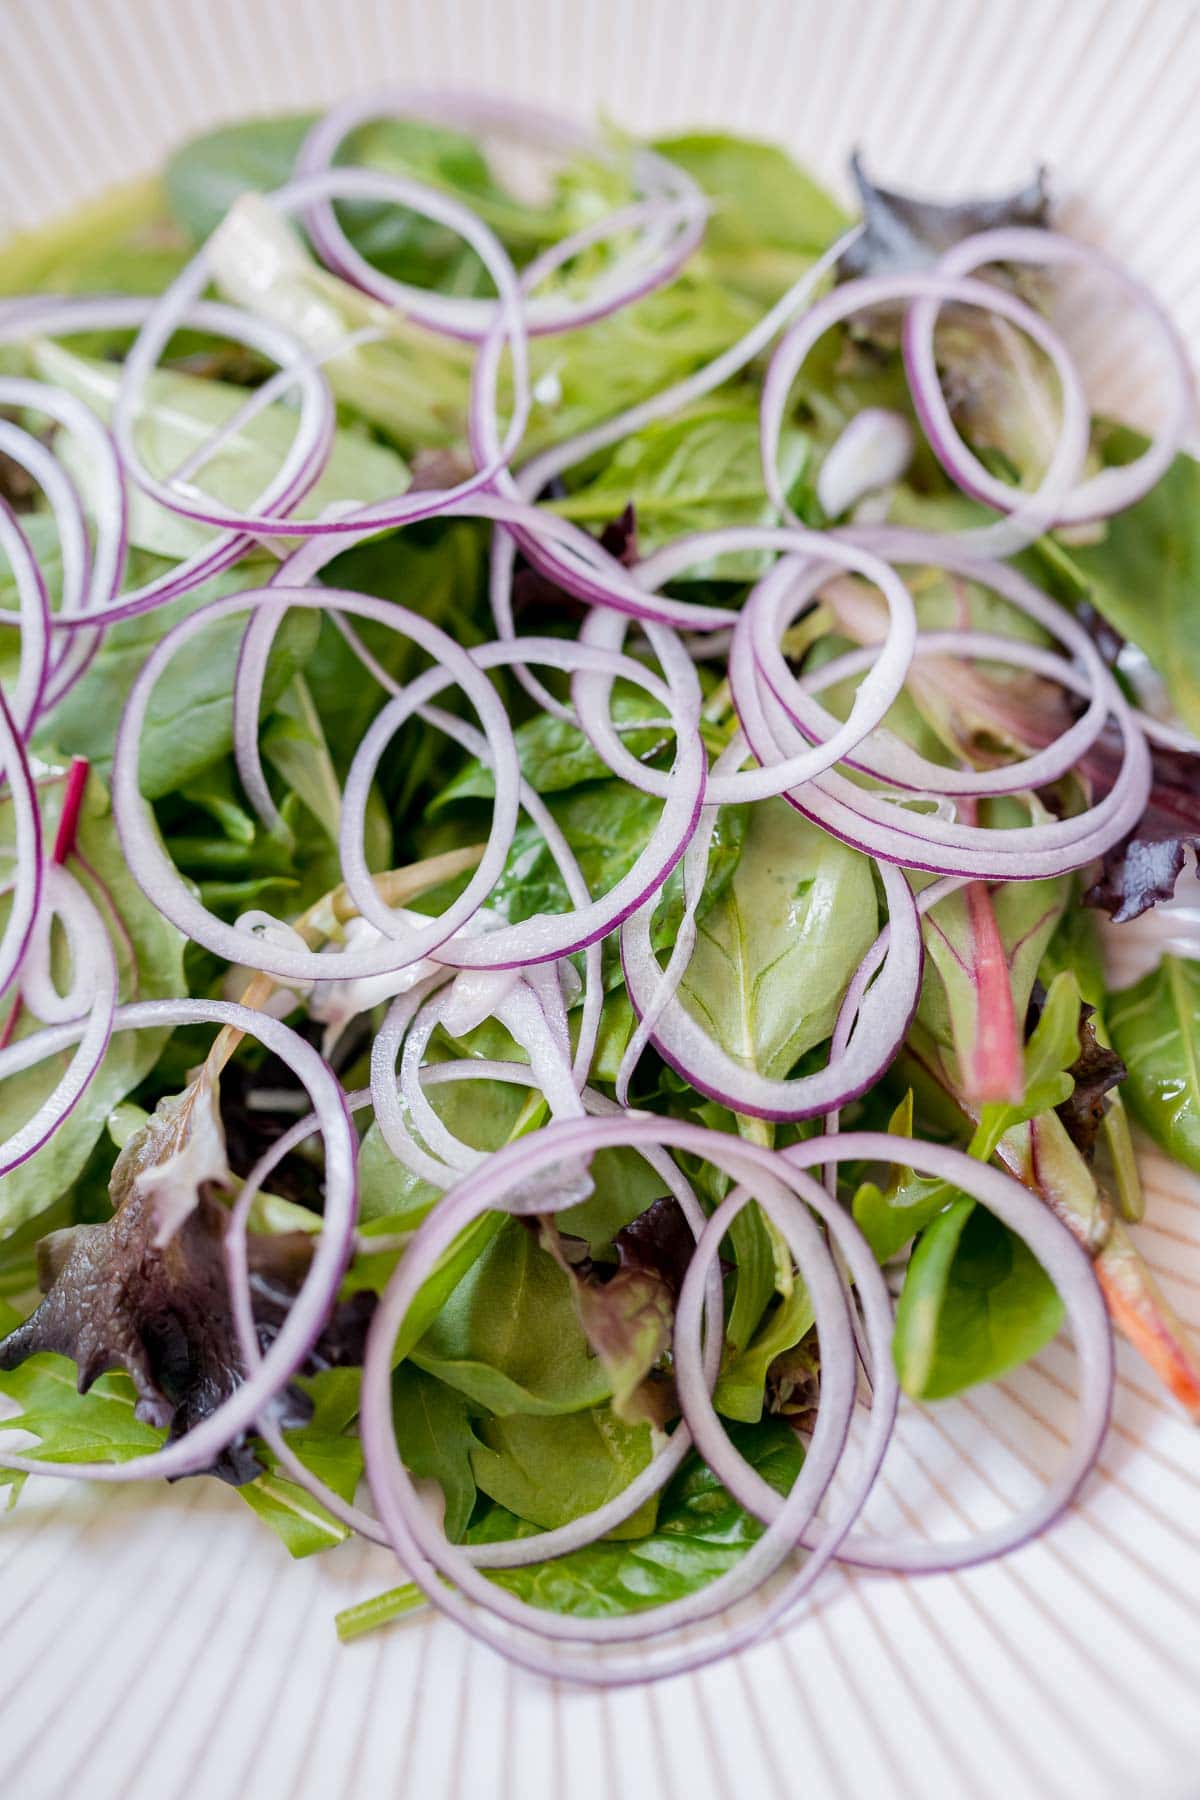 A large white bowl filled with salad greens and red onion slices.